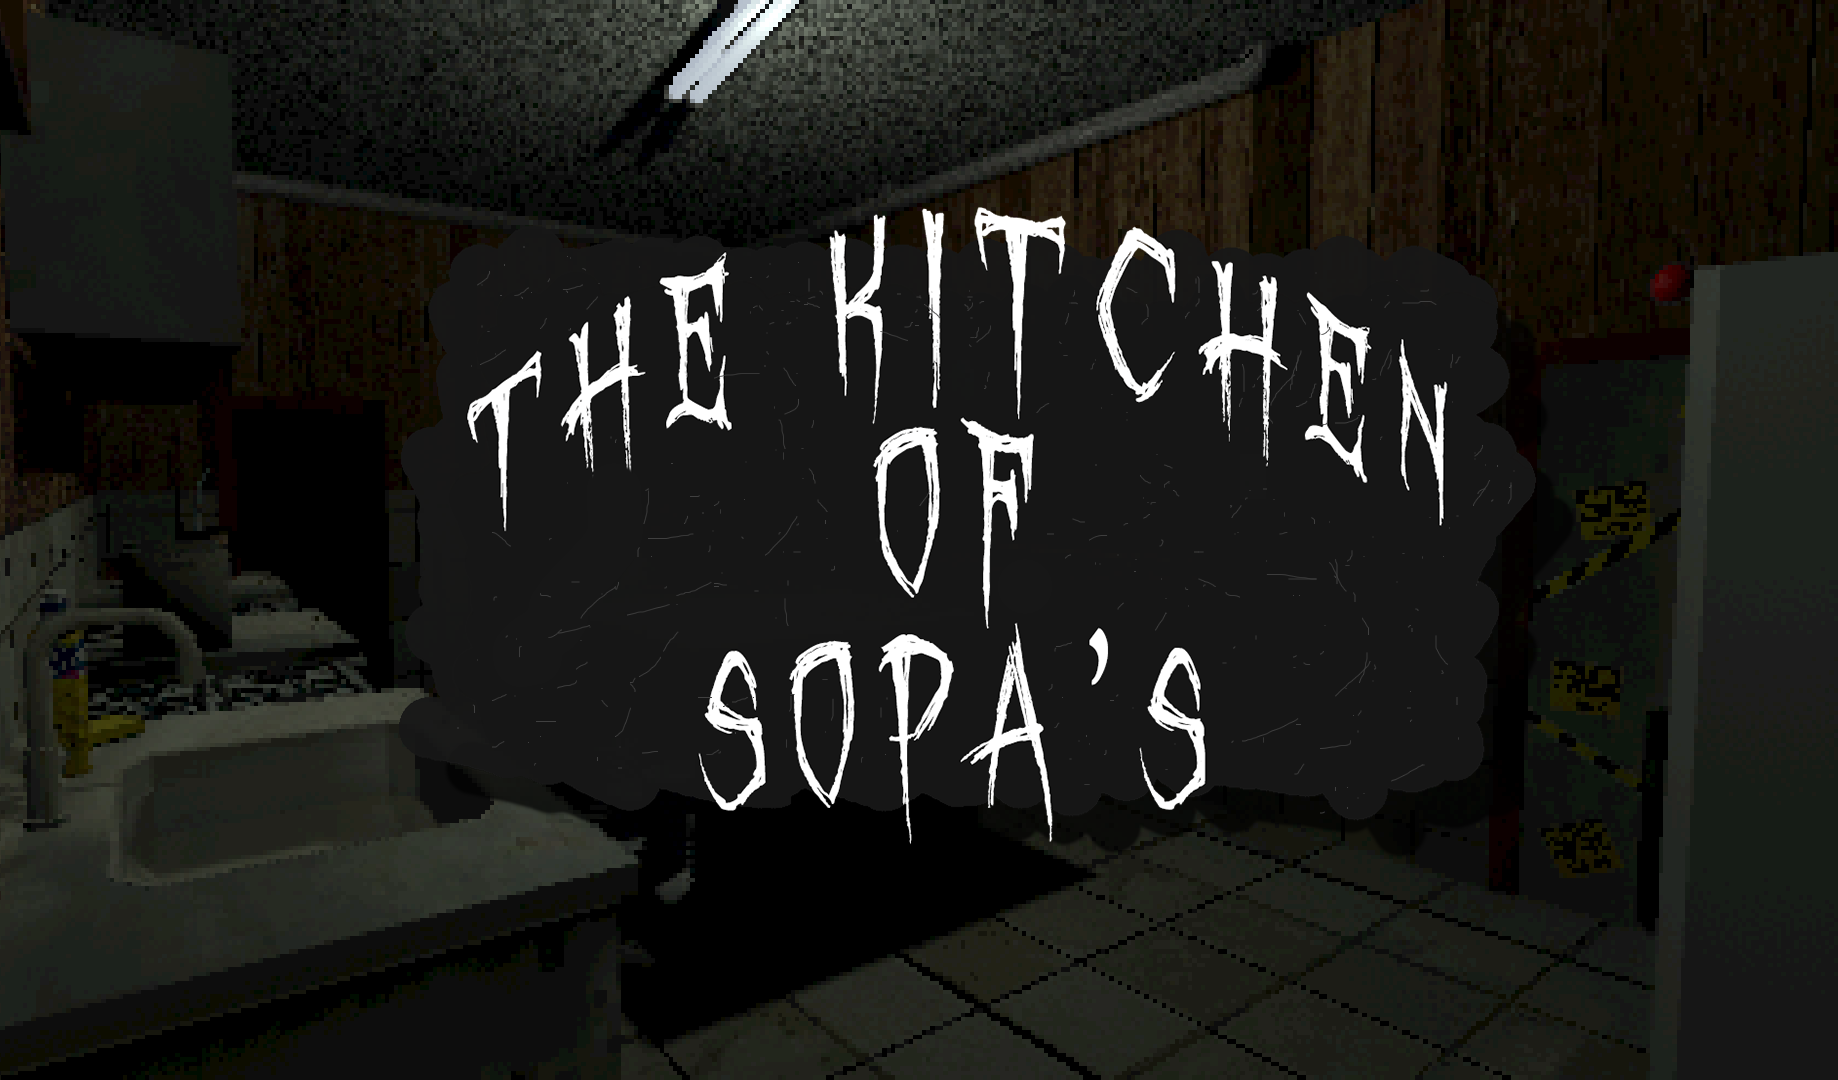 The kitchen of Sopa's